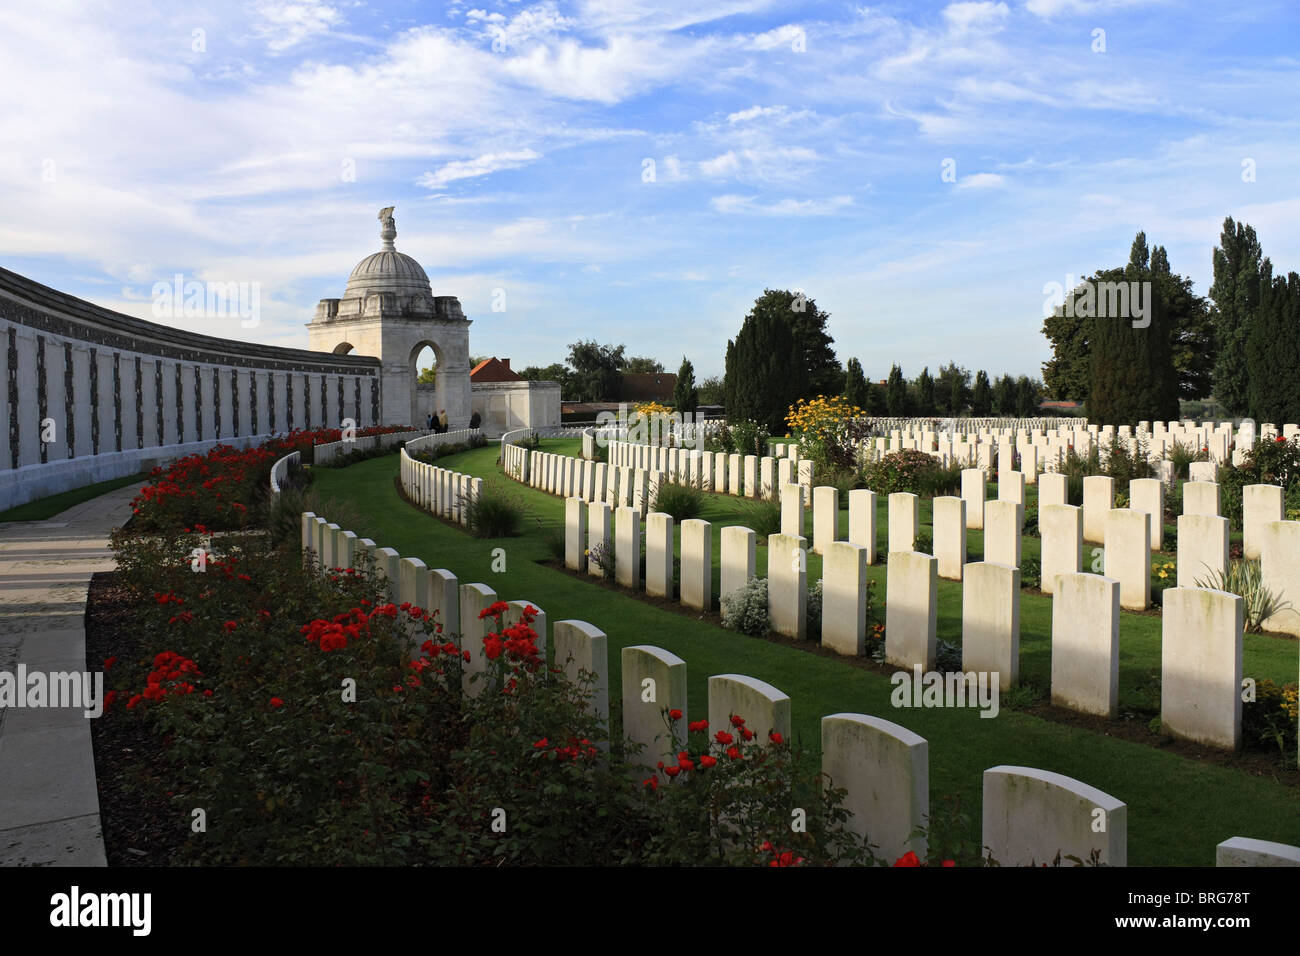 Tyne Cot Commonwealth War Graves Cemetery and Memorial to the Missing for the dead of WW1 in the Ypres Salient in Belgium. Stock Photo